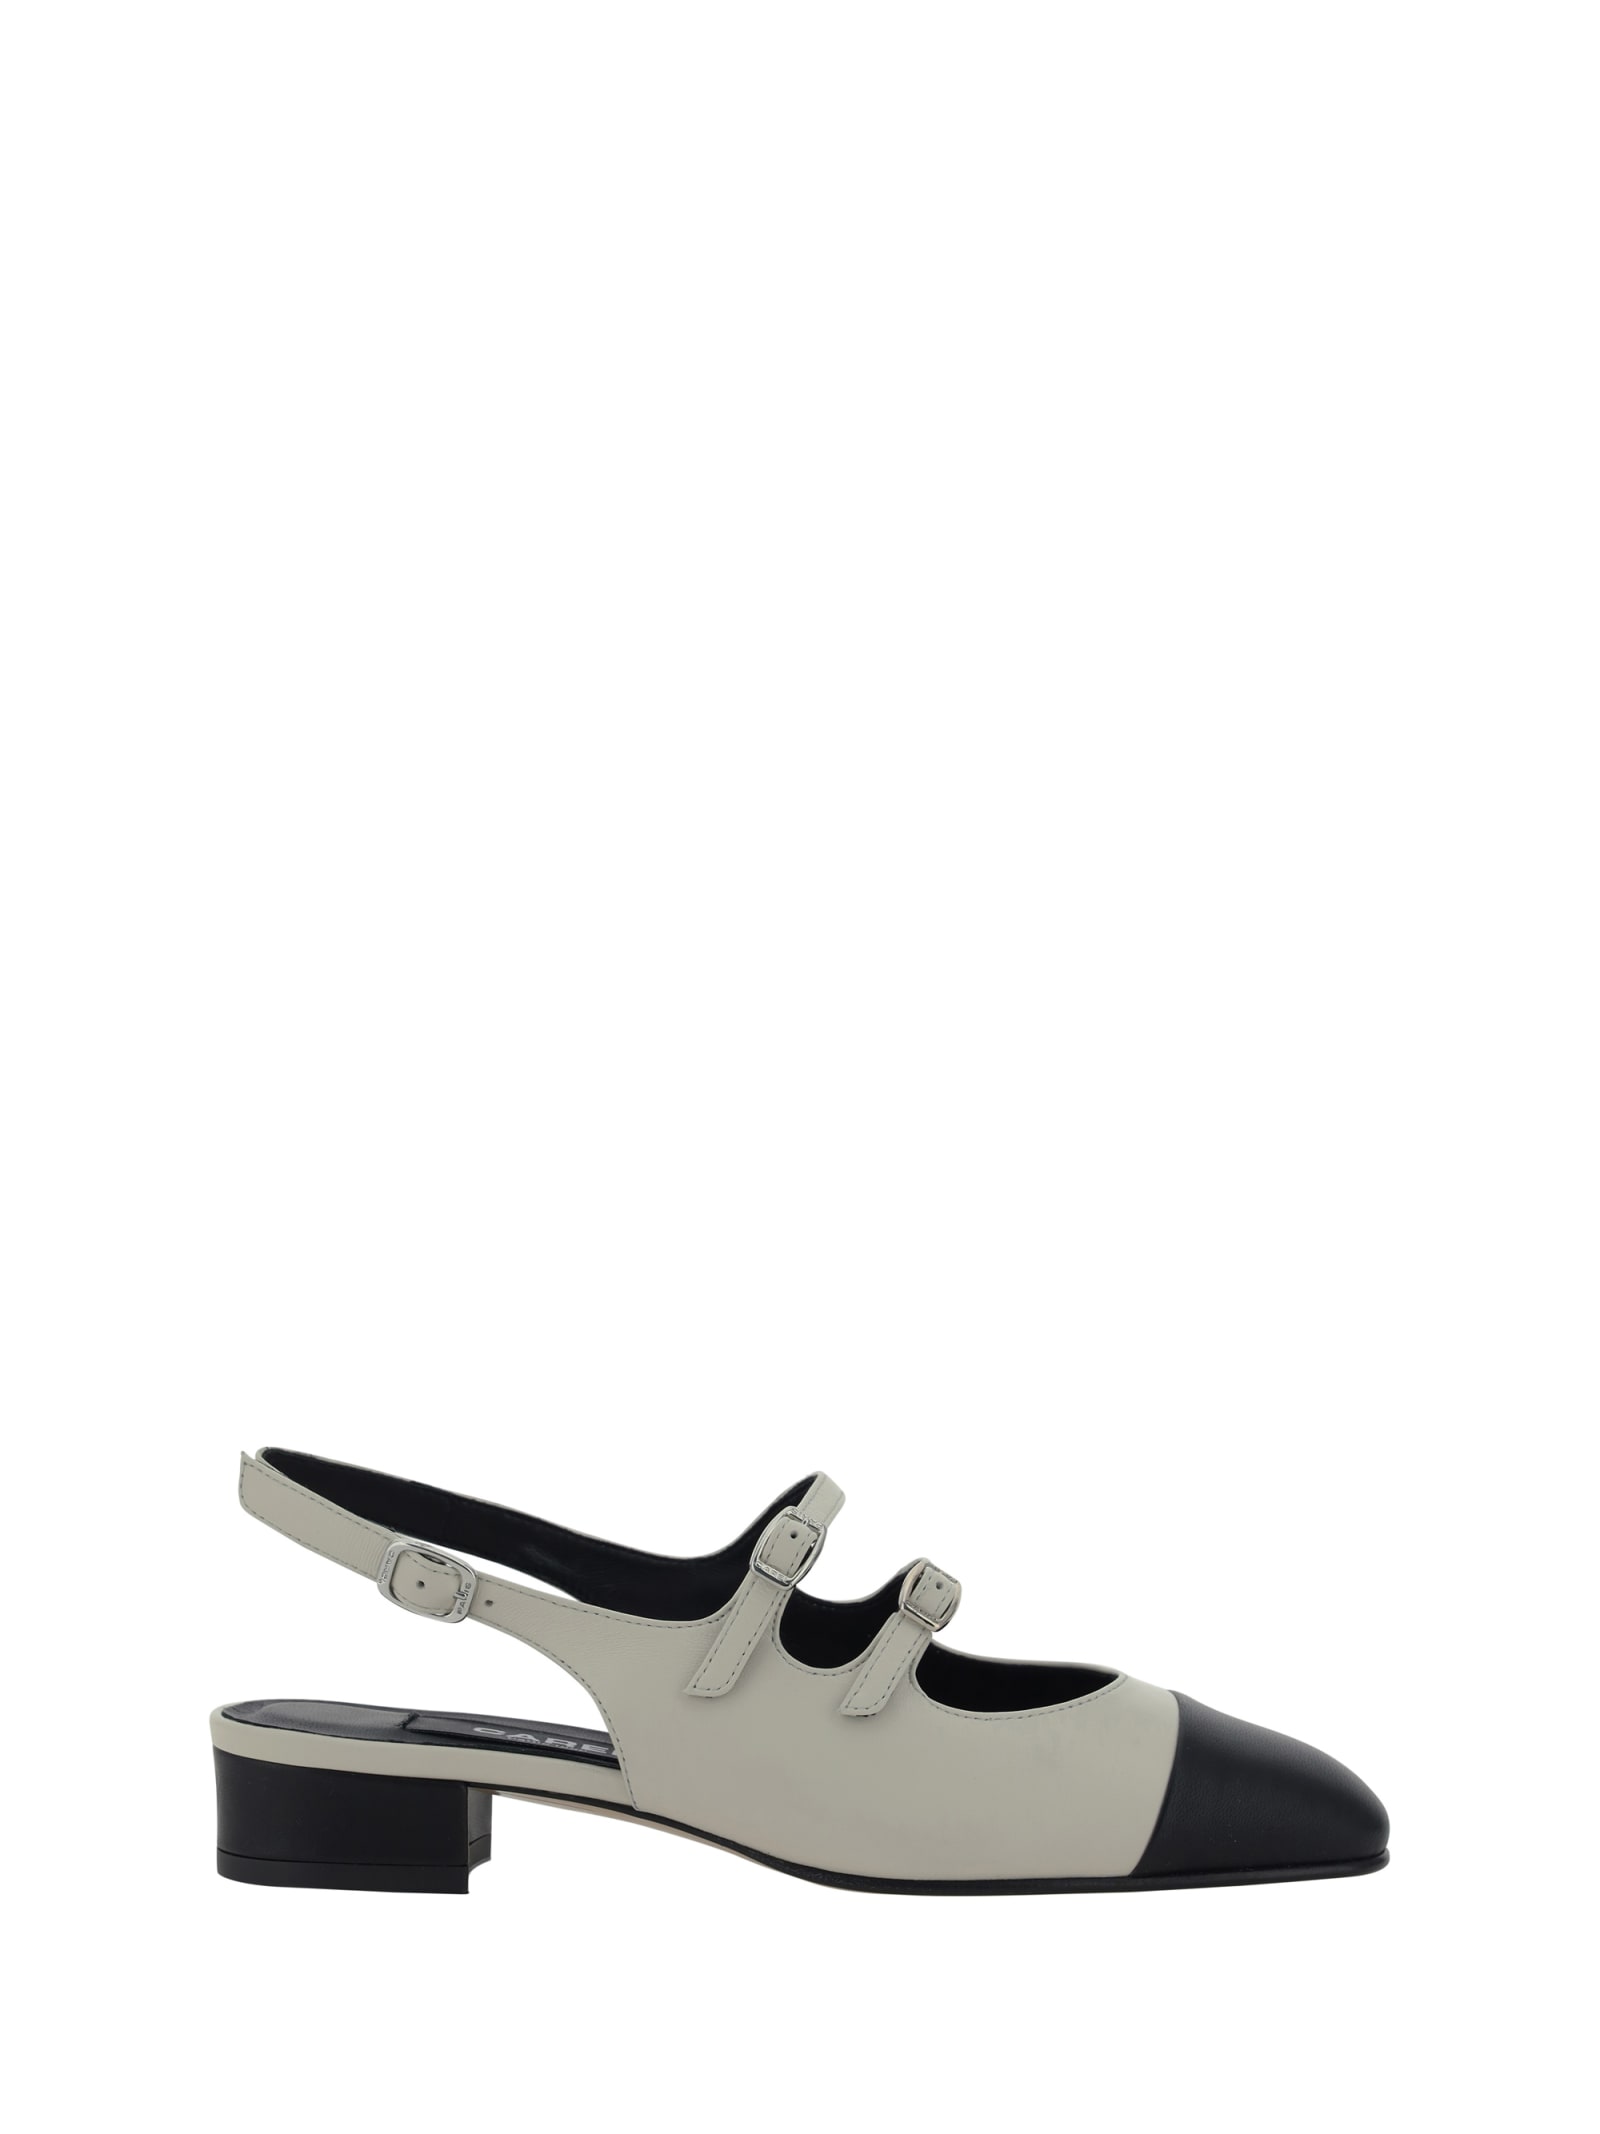 Shop Carel Abricot Pumps In Beige And Black